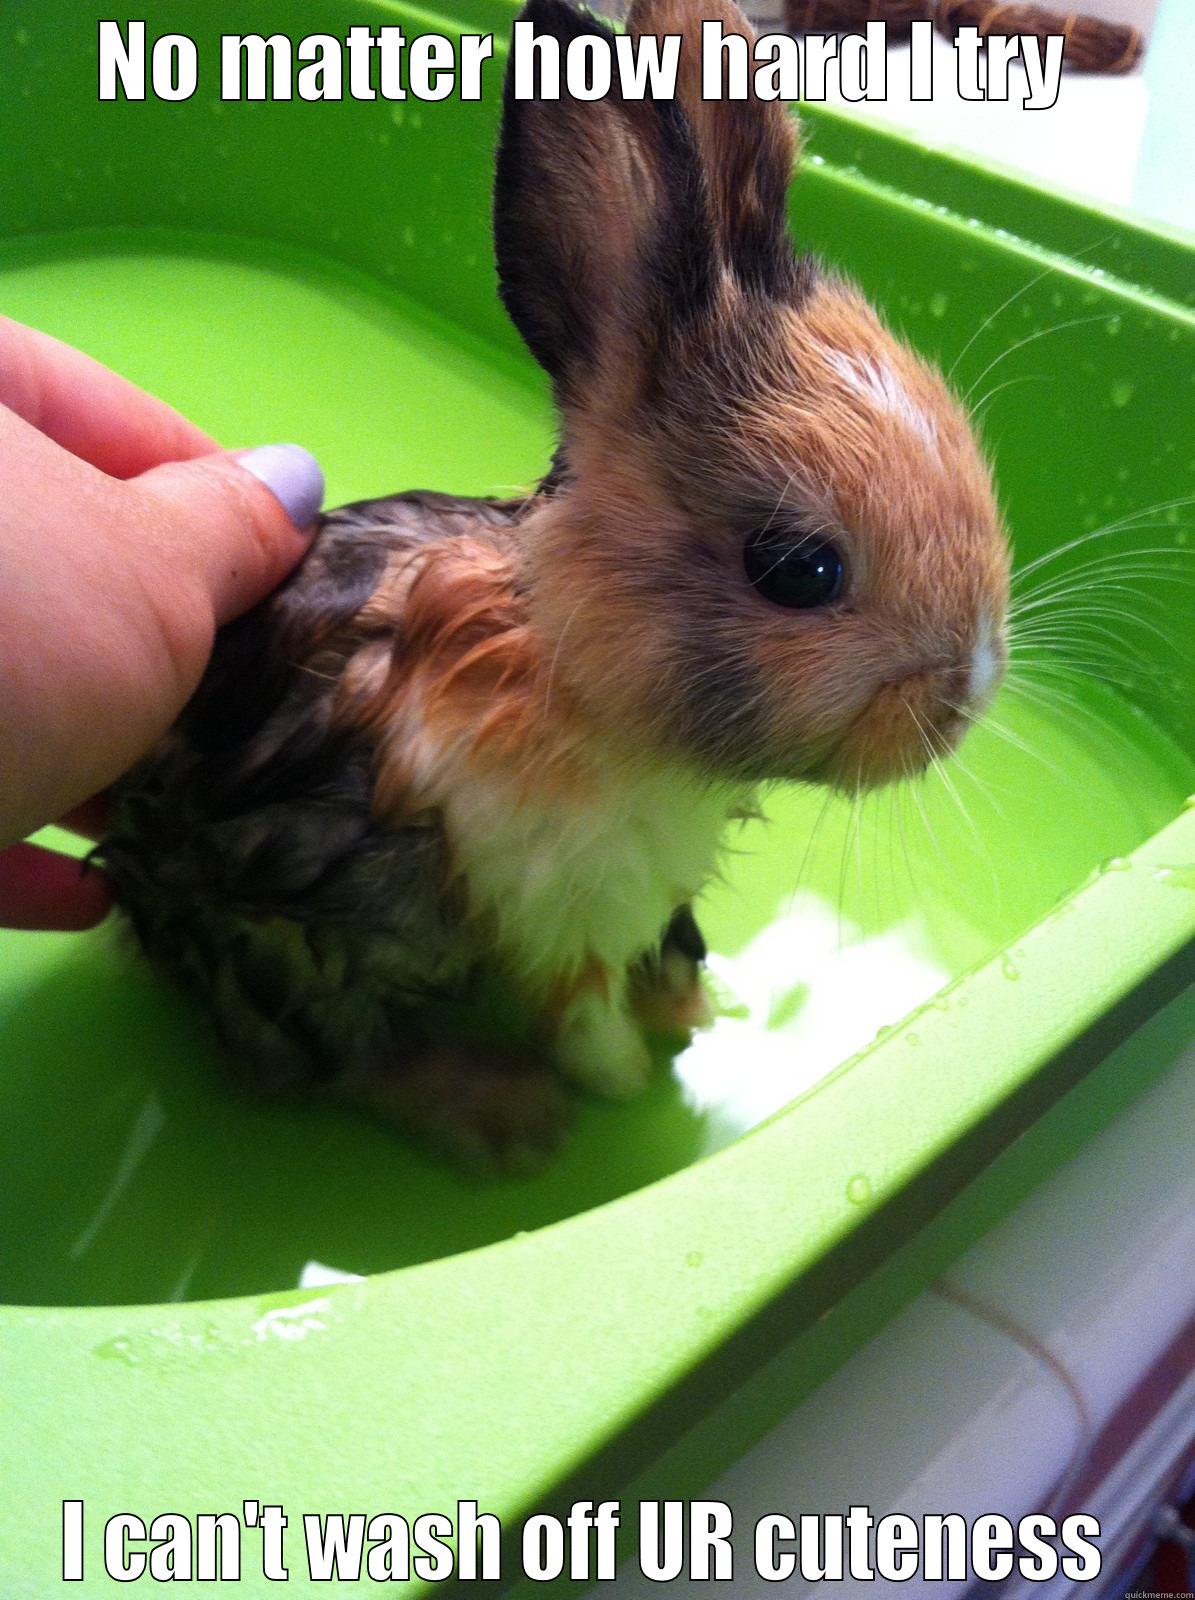 Hunny Bunny  - NO MATTER HOW HARD I TRY  I CAN'T WASH OFF UR CUTENESS  Misc